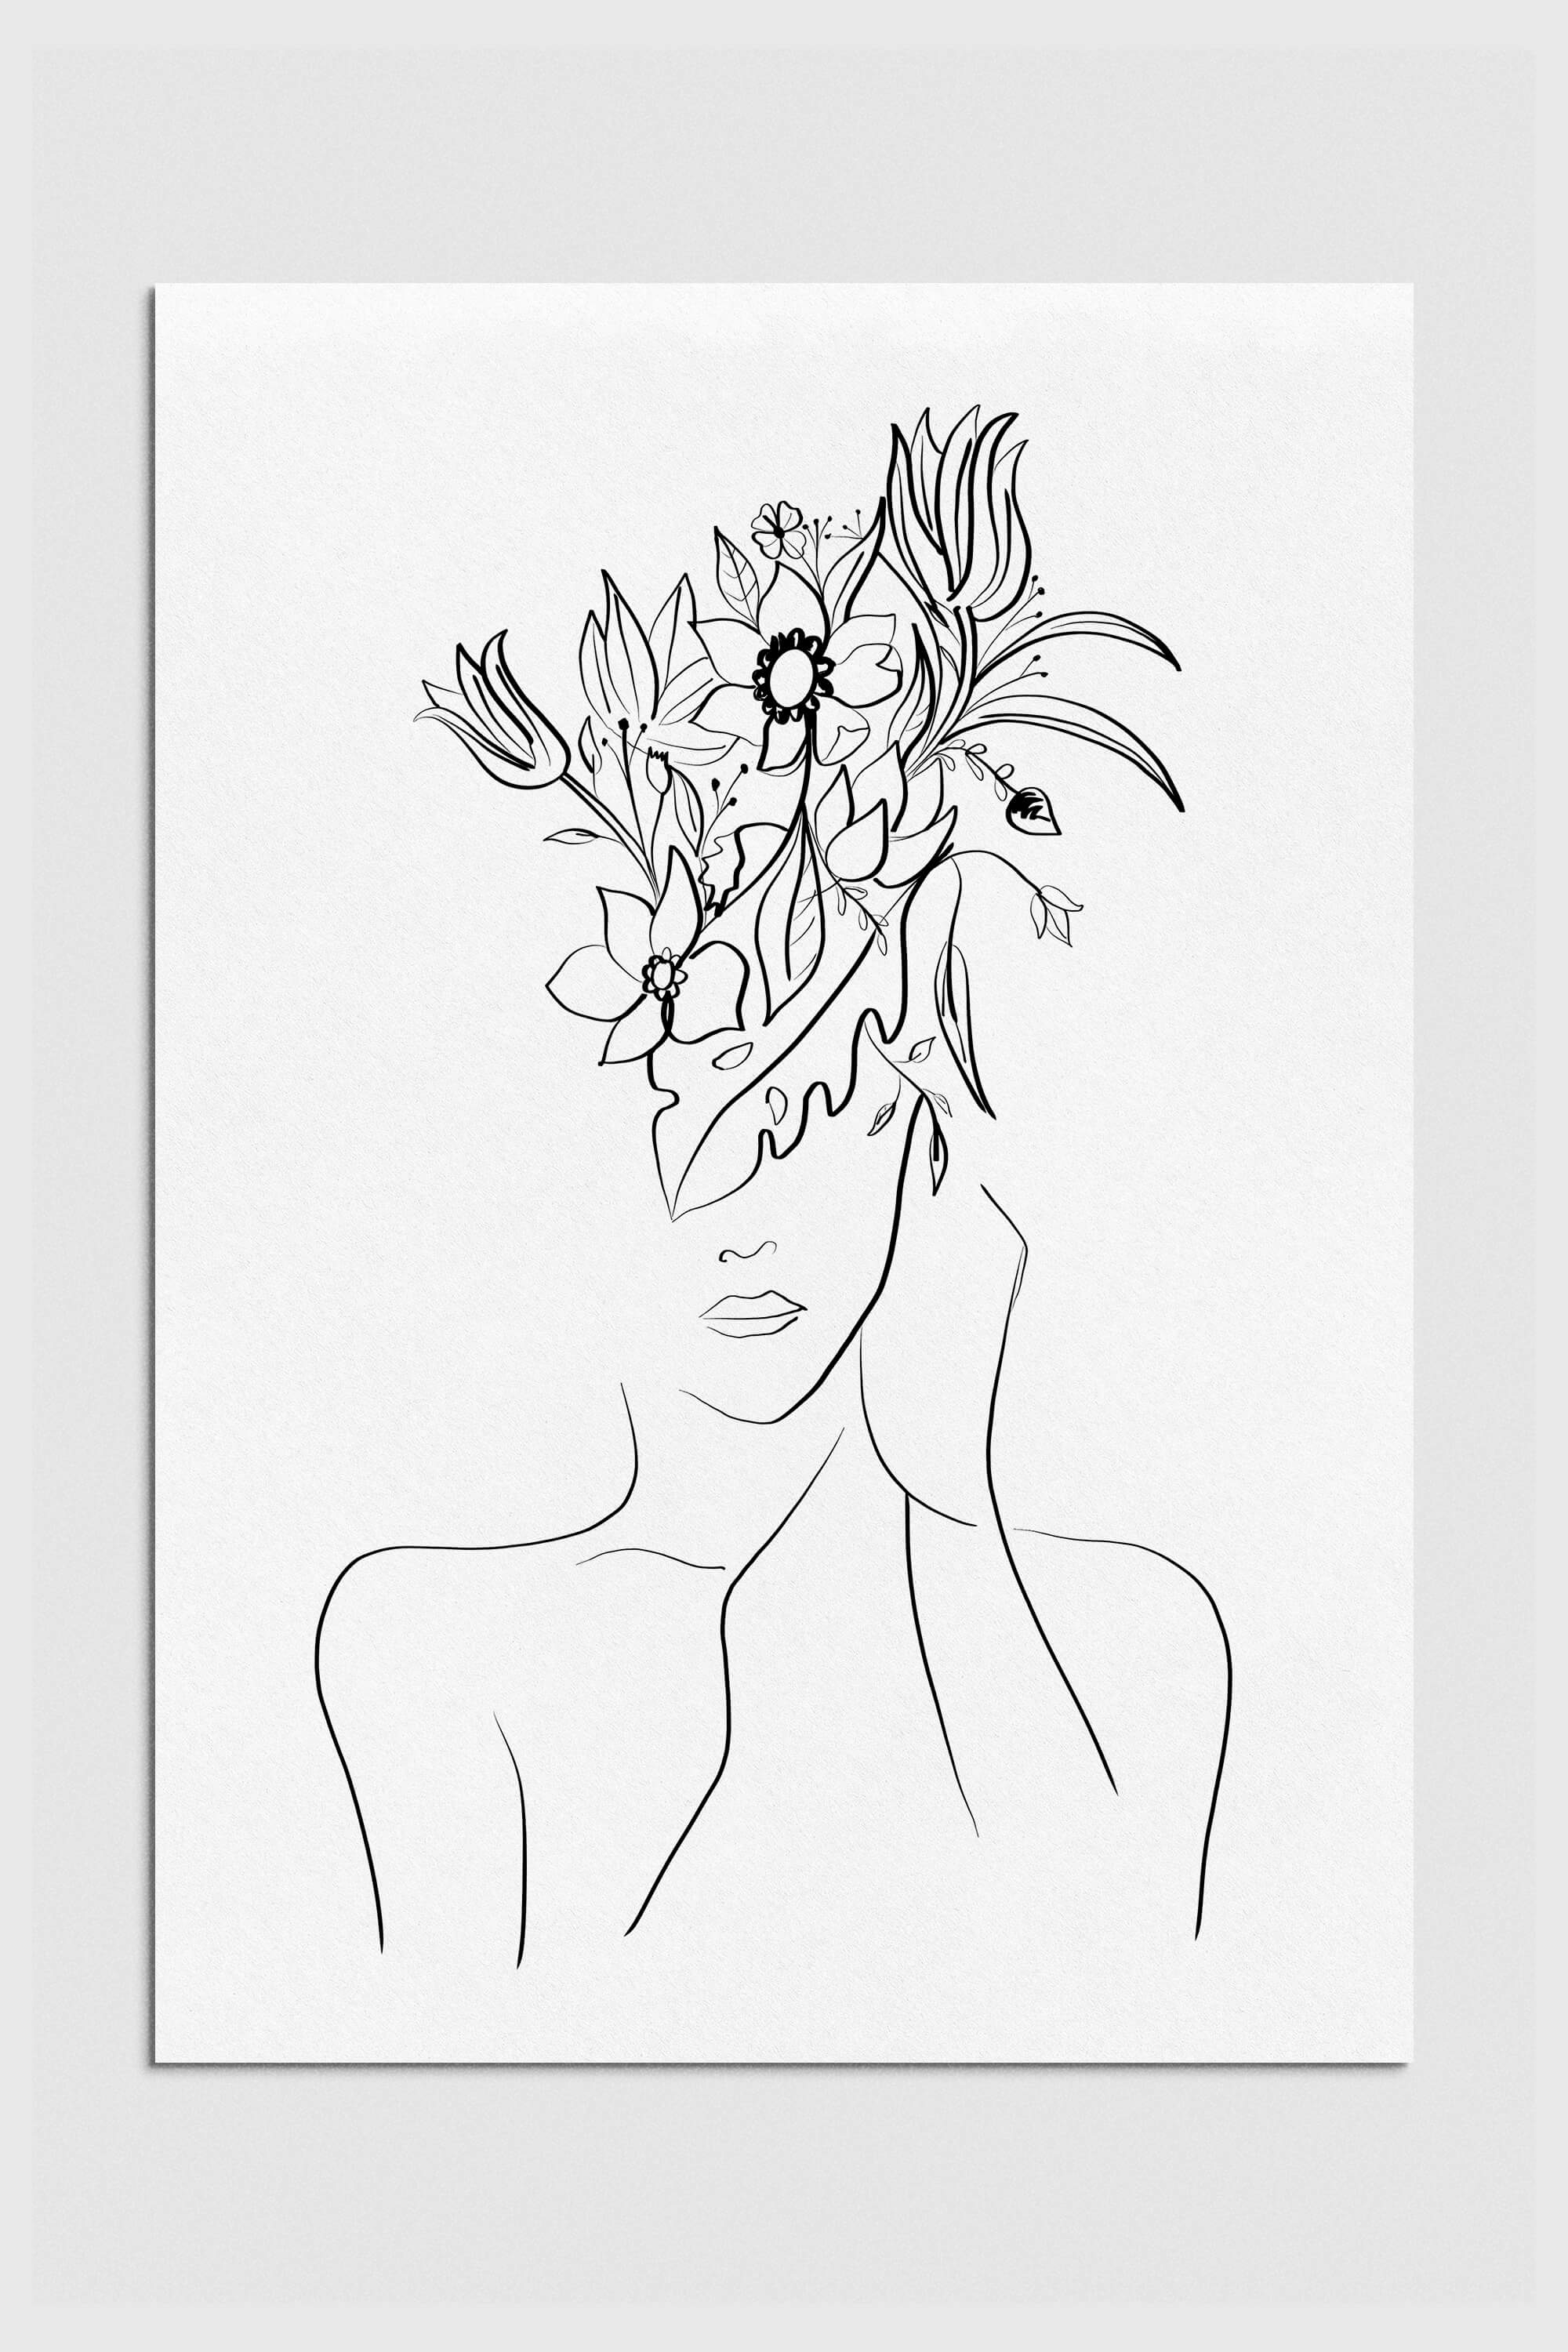 A black and white line drawing of a woman with a flower head. This elegant and feminine art print seamlessly blends contemporary chic with timeless floral beauty. Ideal for stylish wall decor.